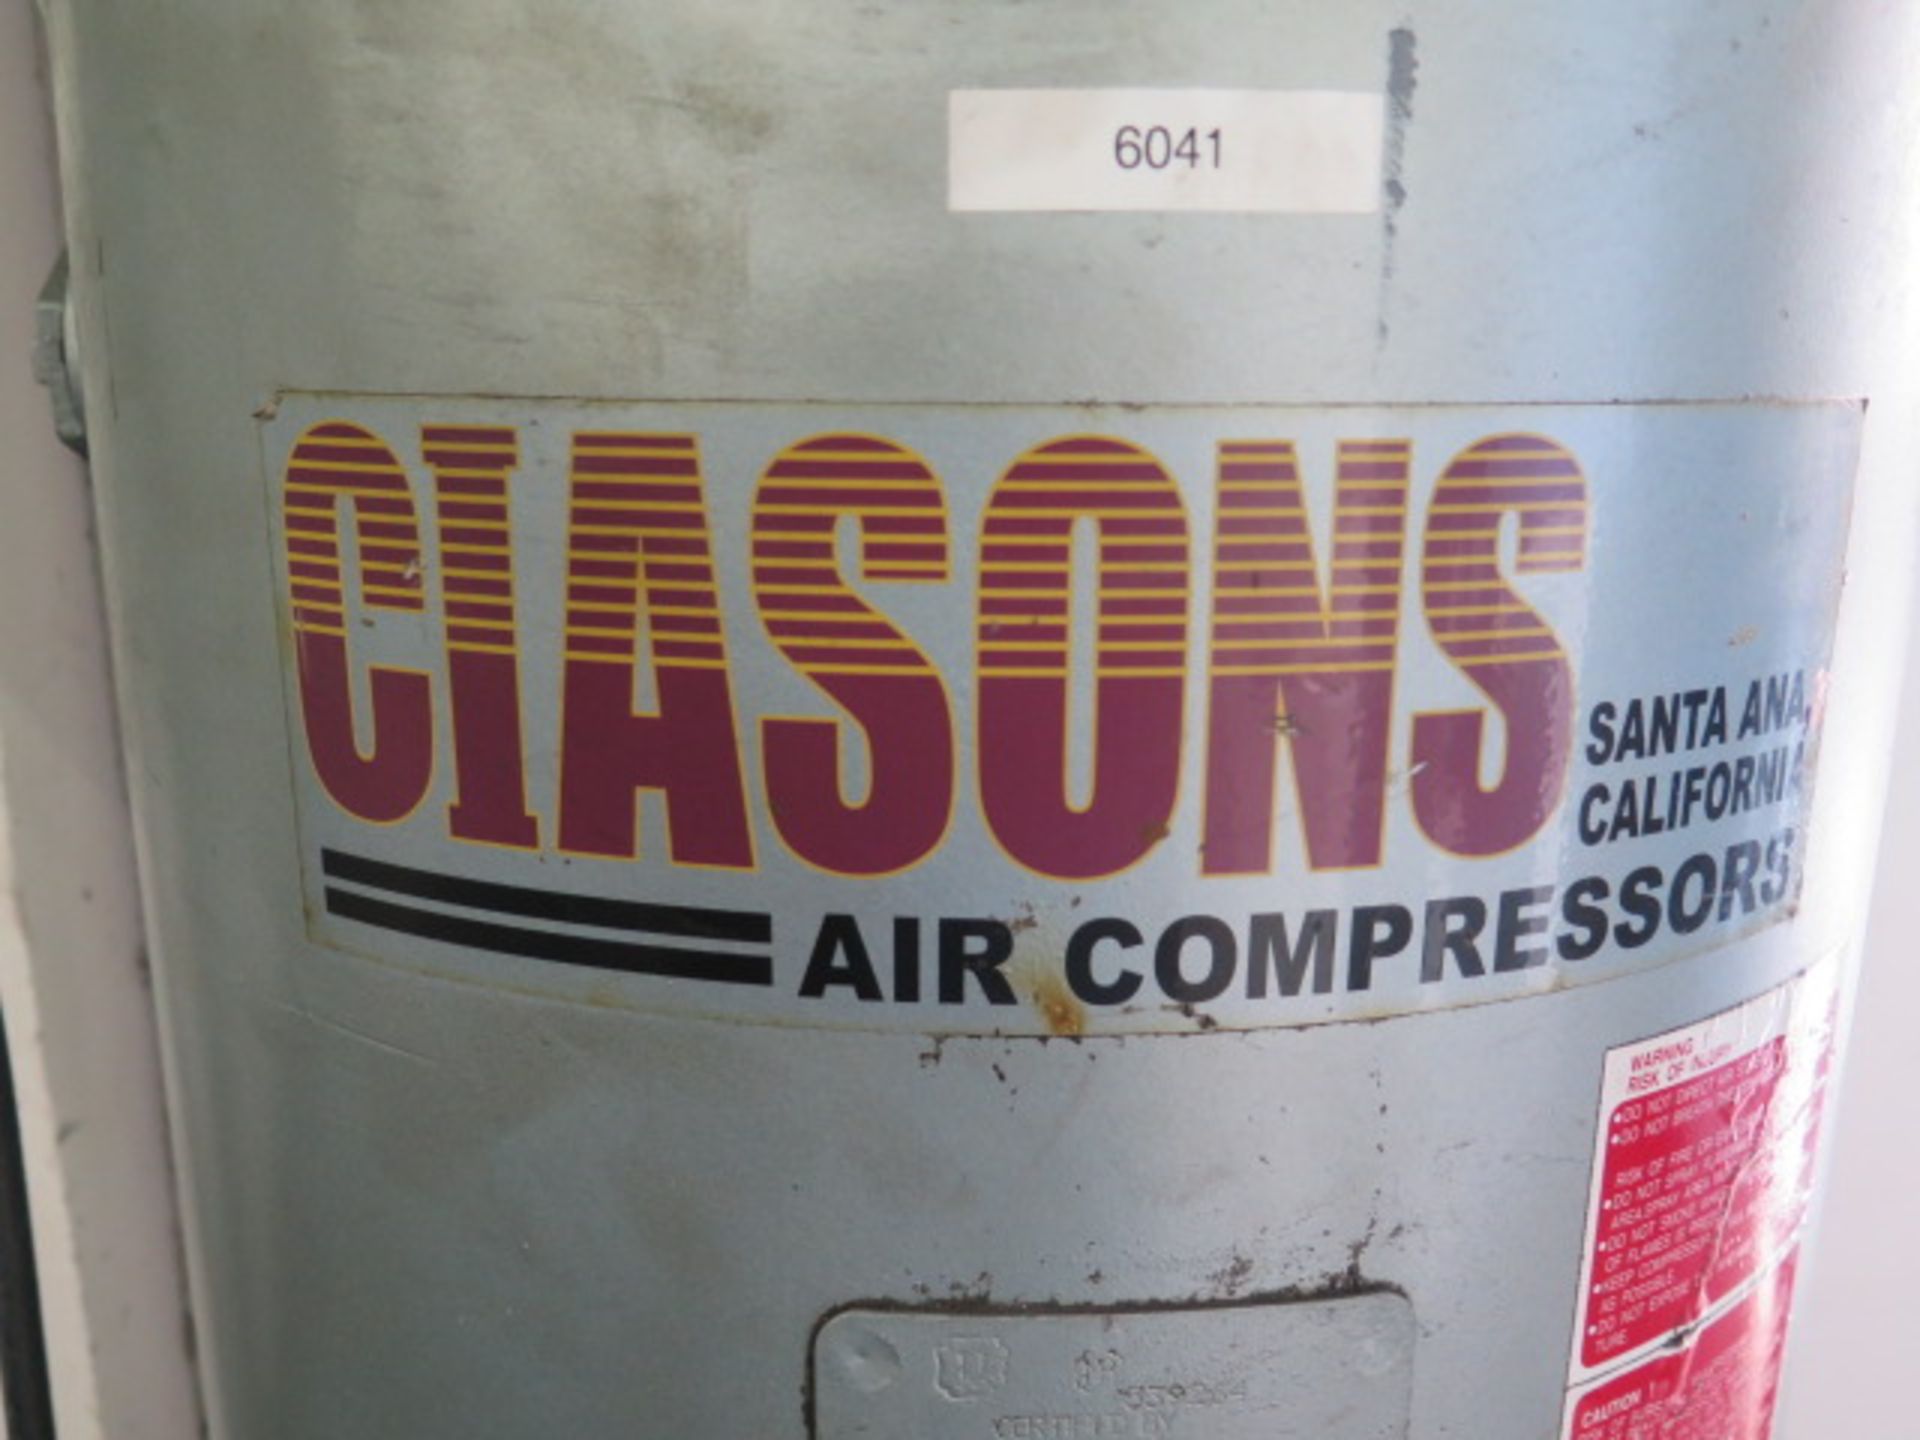 Caisons 5Hp Vertical Air Compressor w/ 3-Stage Pump, 60 Gallon Tank (SOLD AS-IS - NO WARRANTY) - Image 4 of 5